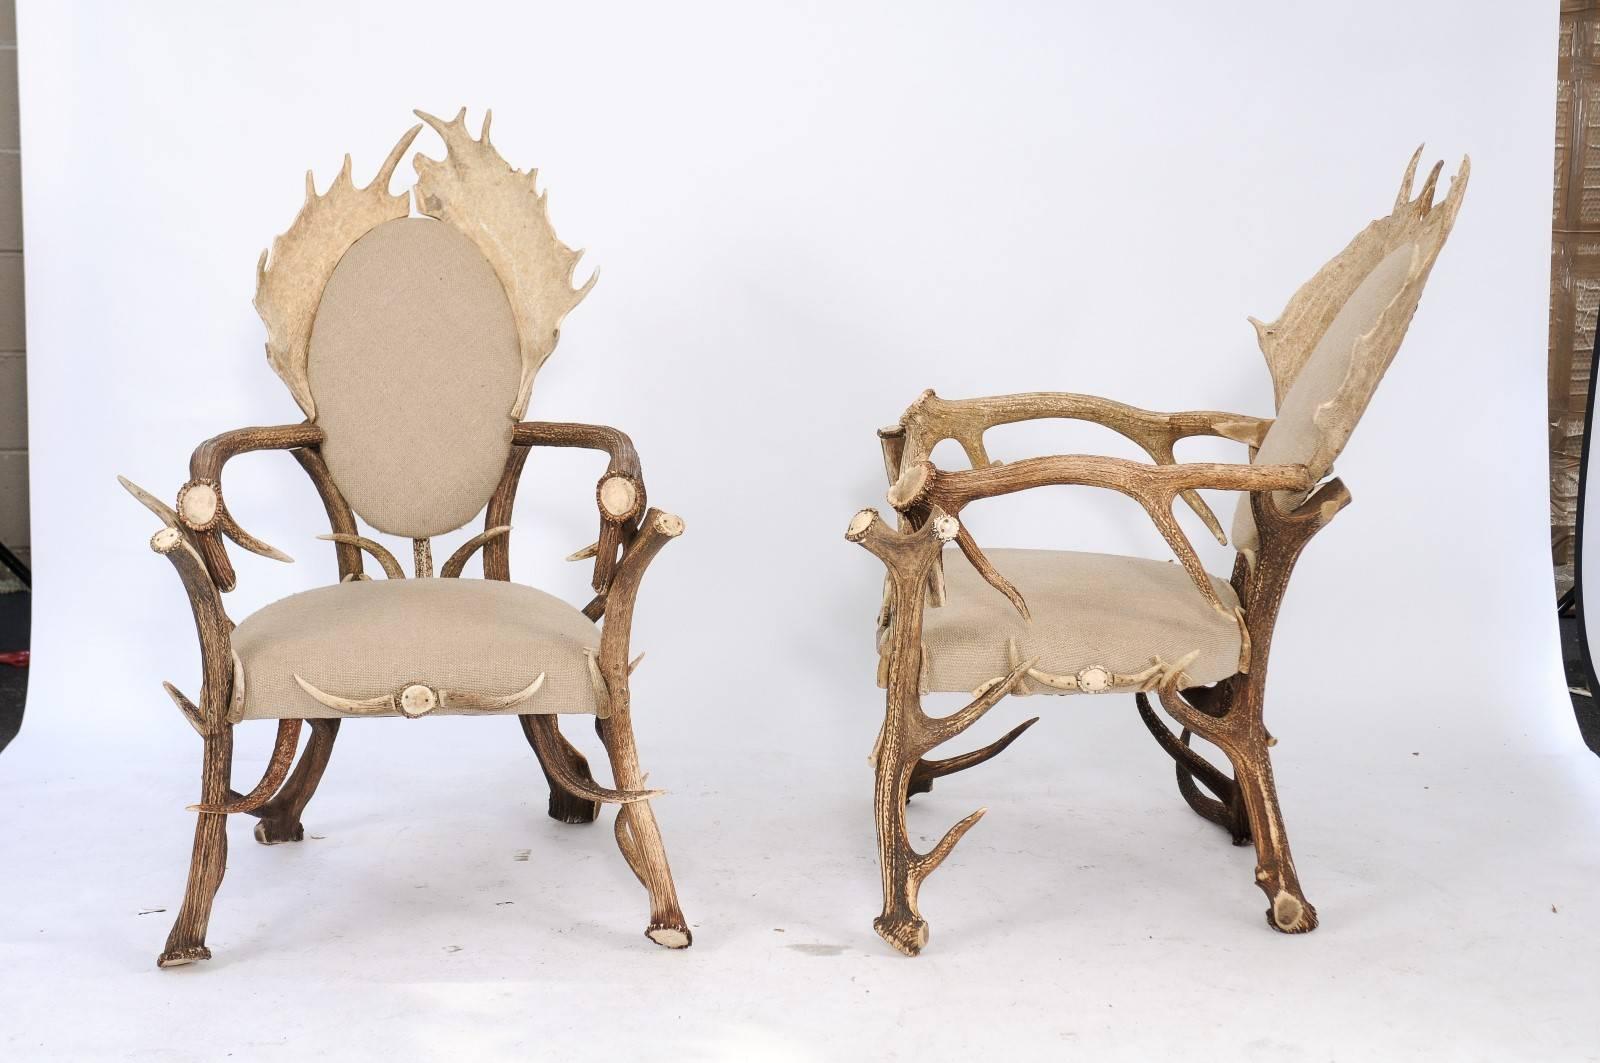 Country Pair of Antler Armchairs from the Forests of France and Upholstered in Linen